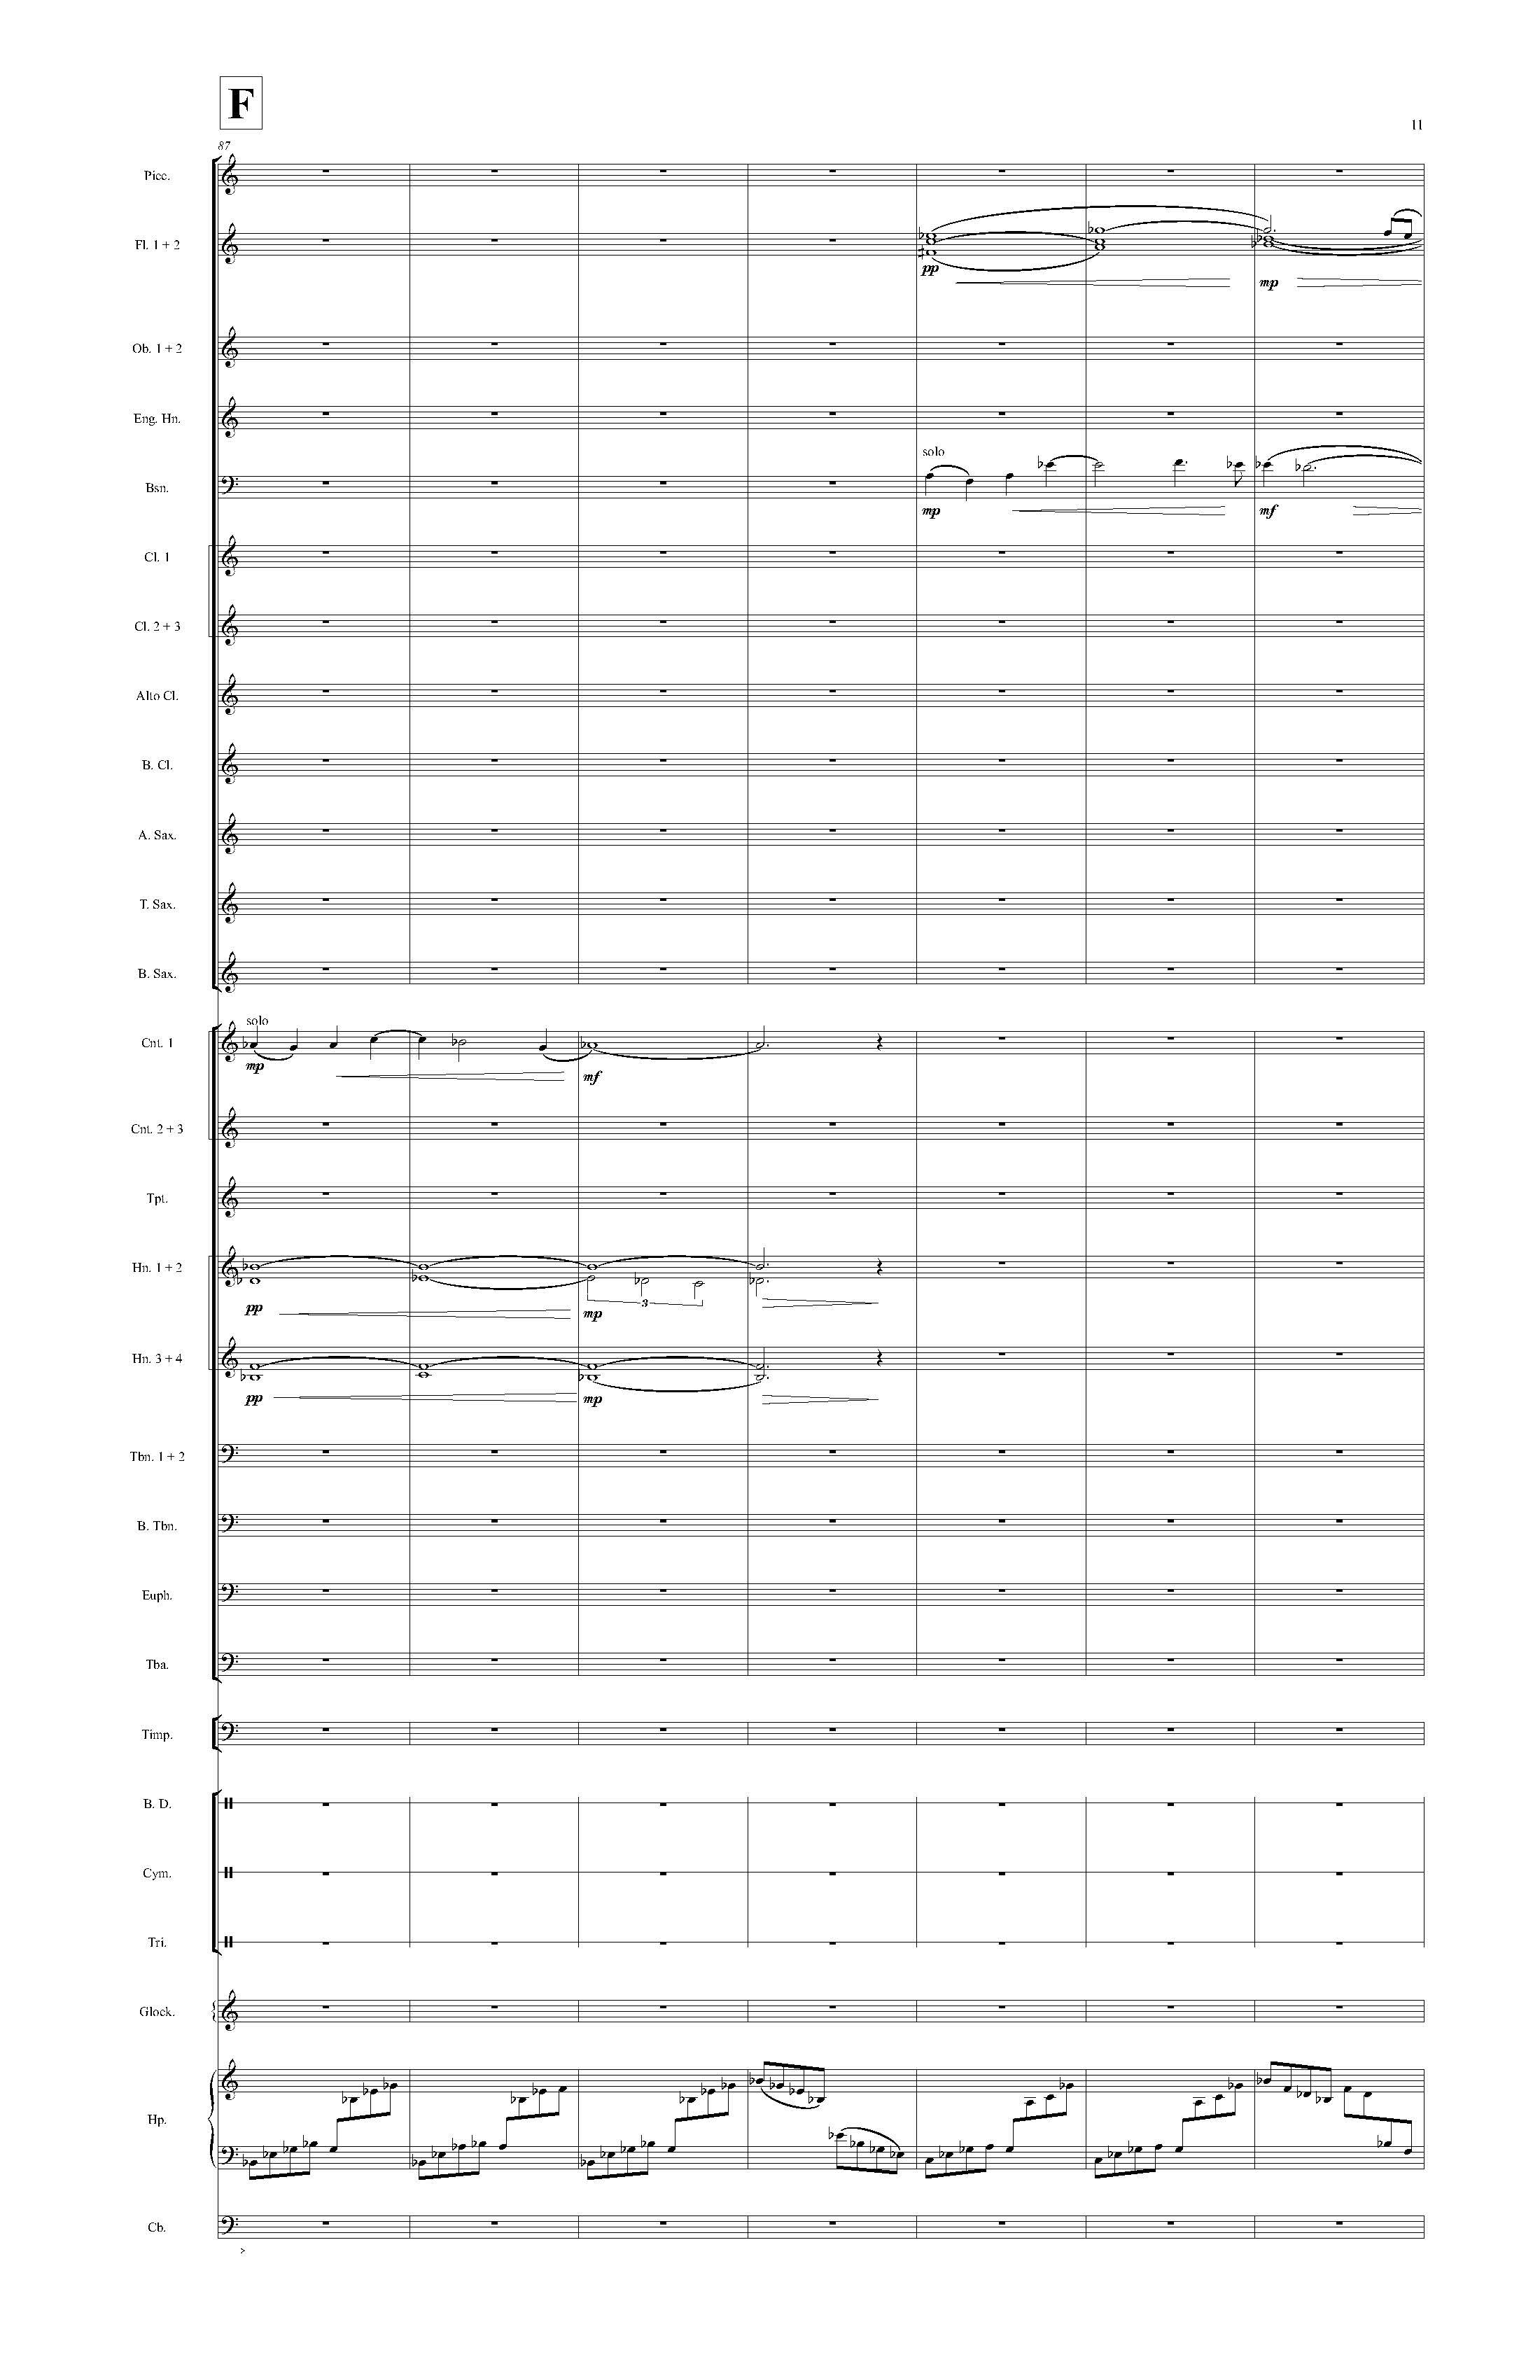 Psyche - Complete Score_Page_17.jpg